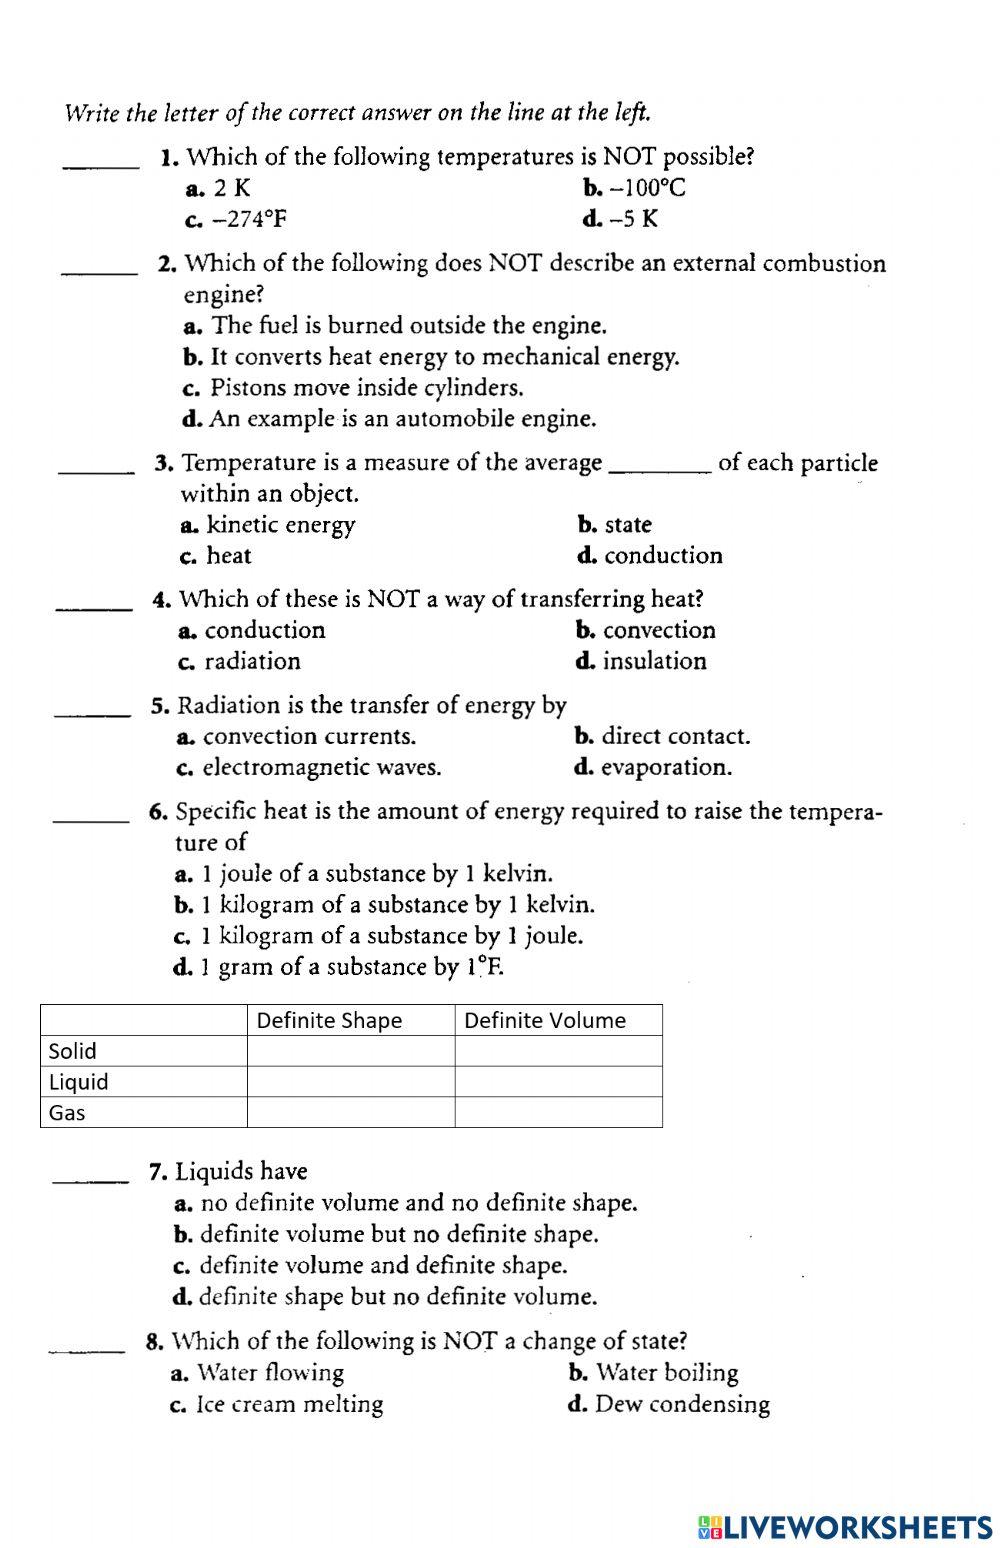 PS-14-Thermal Energy Review page 1